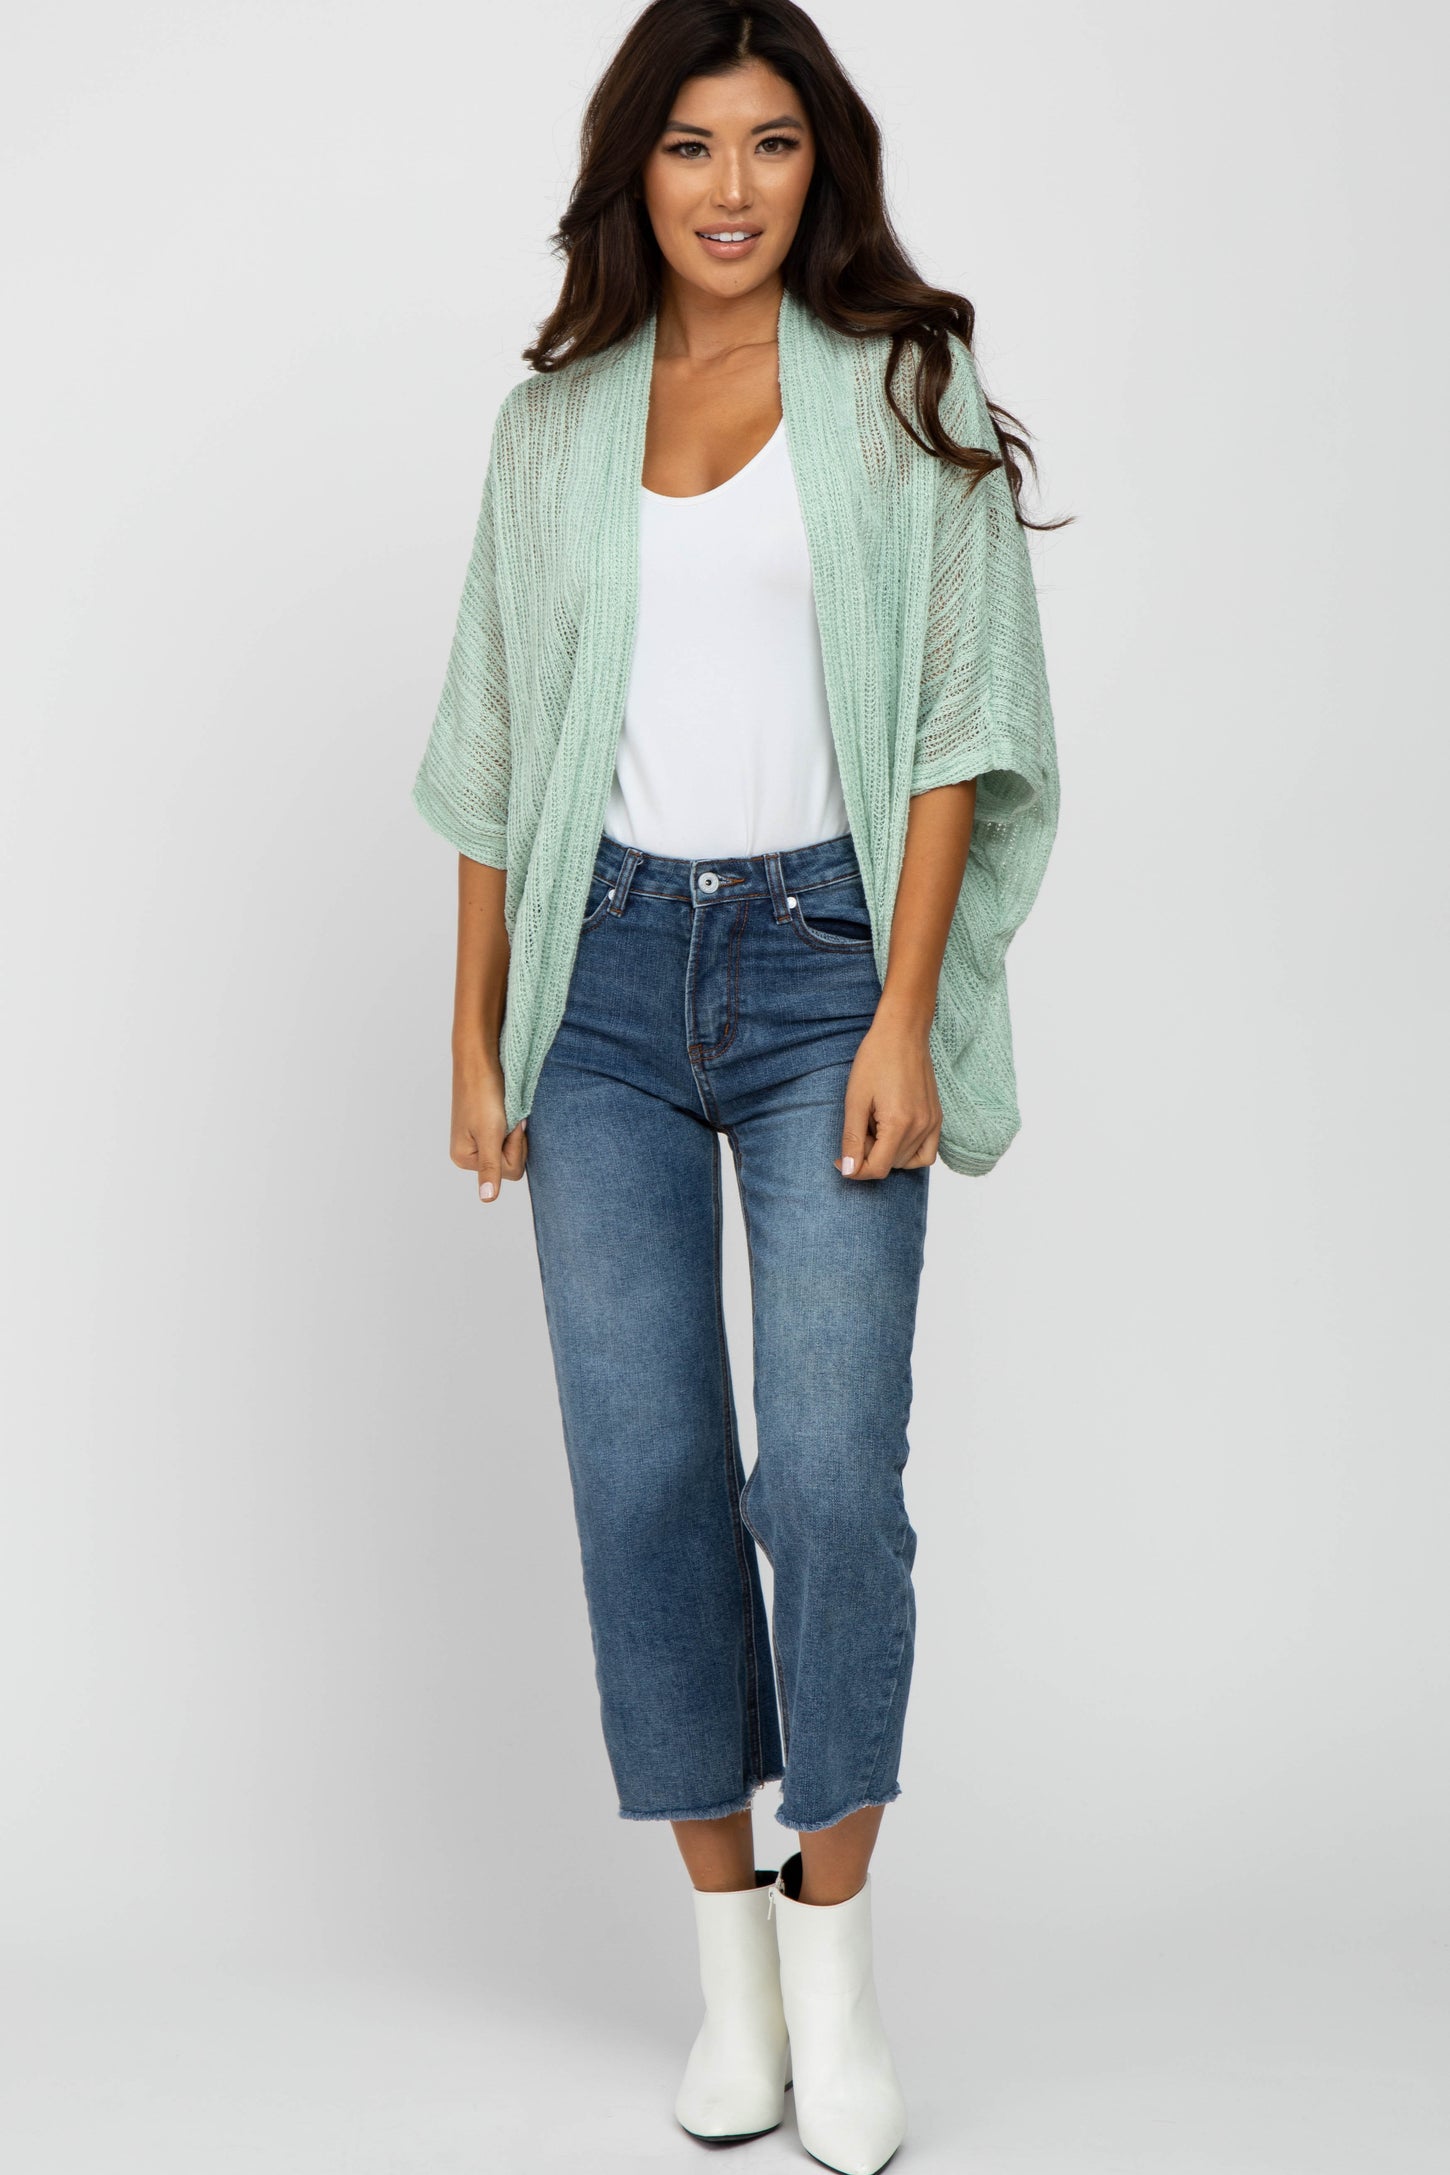 Mint Green Woven Knit Dolman Cover Up